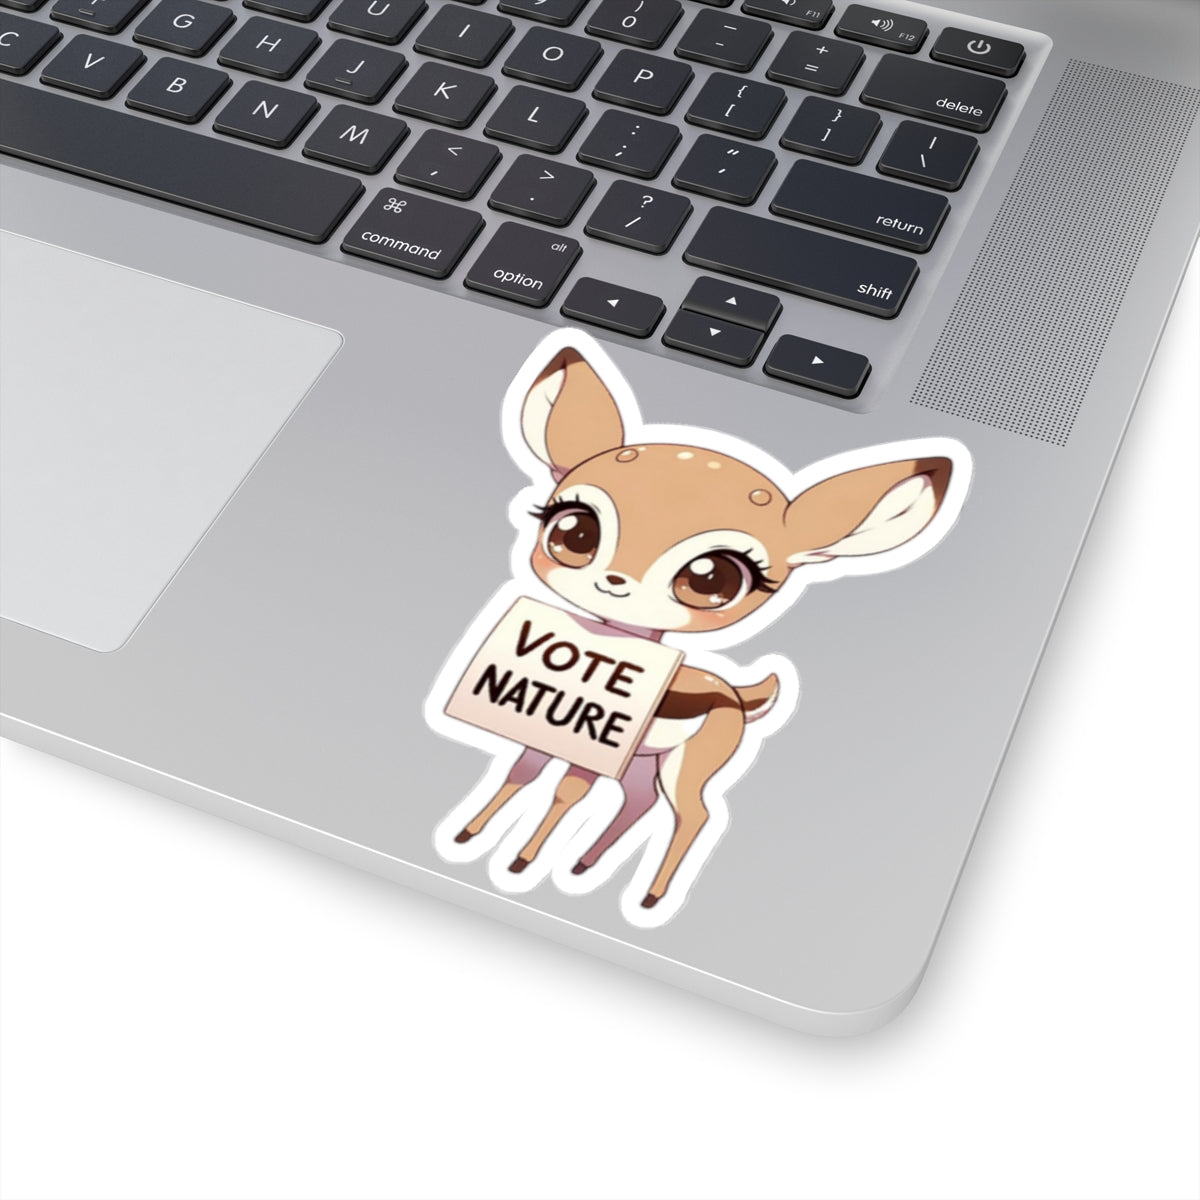 Inspirational Cute Fawn Statement vinyl Sticker: Vote Nature! for laptop, kindle, phone, ipad, instrument case, notebook, mood board